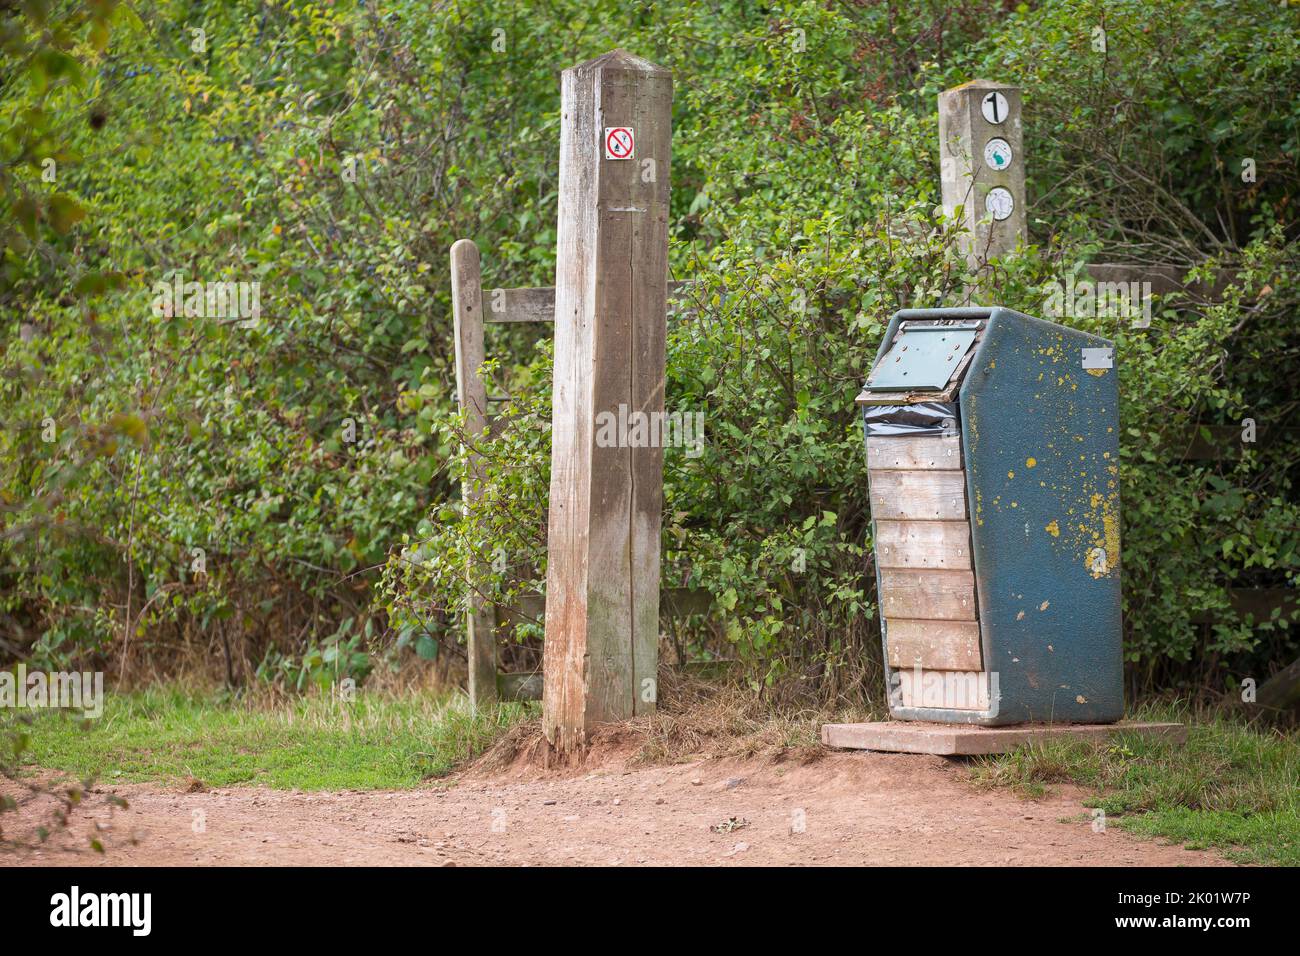 Isolated litter bin (rubbish/waste bin) in a UK country park. Stock Photo